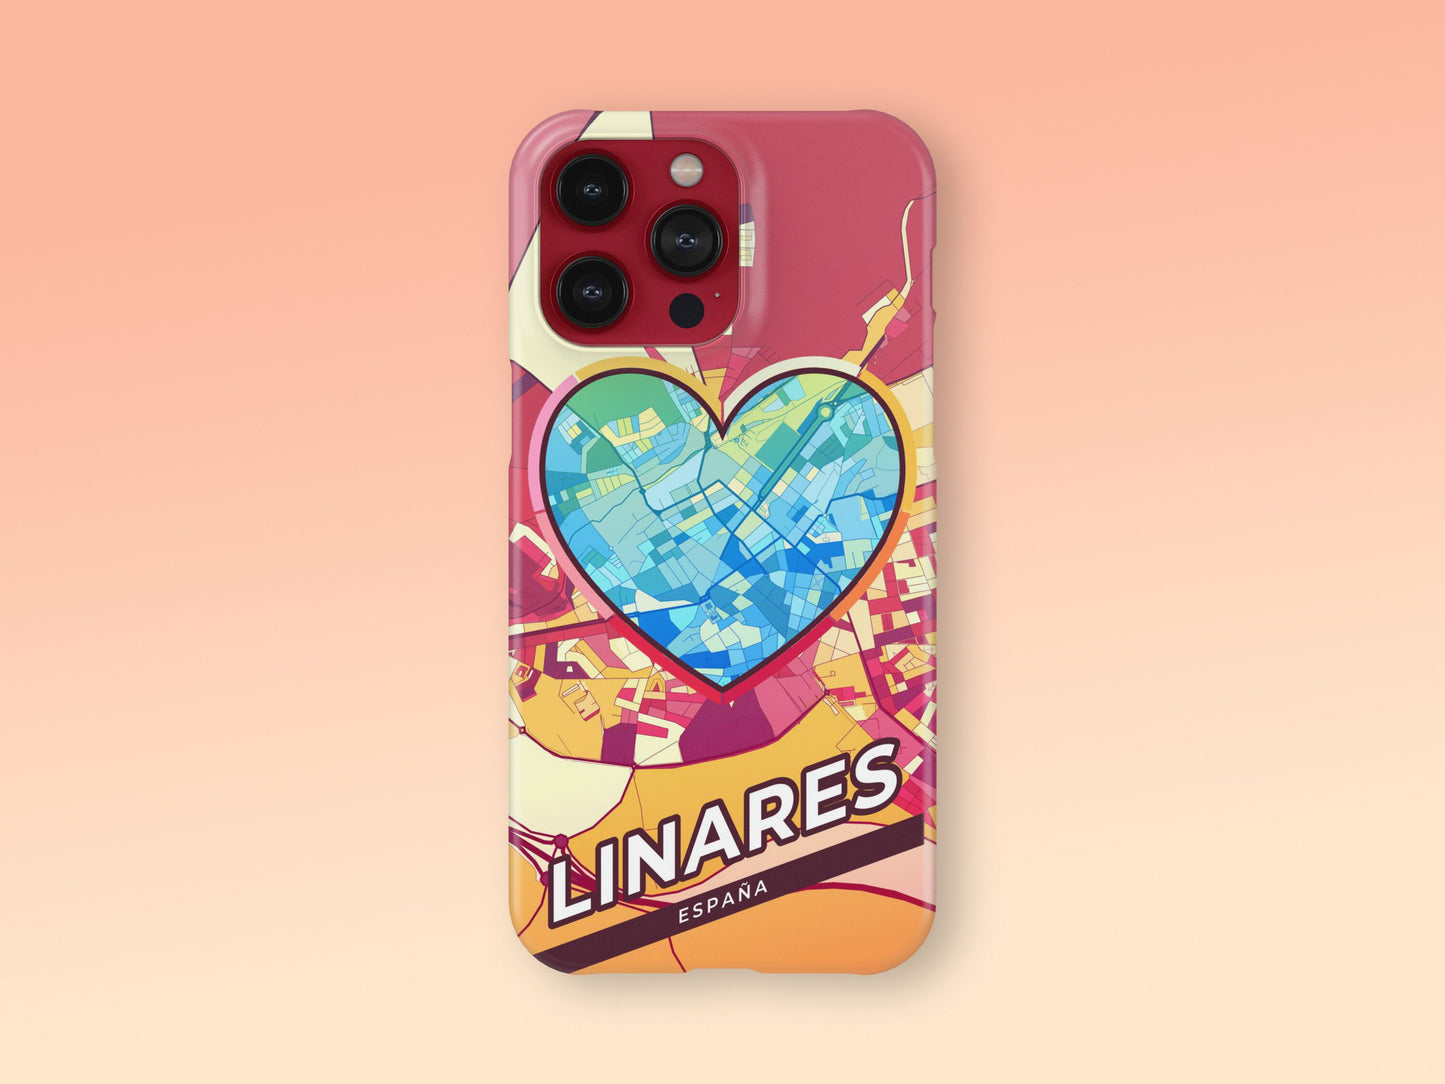 Linares Spain slim phone case with colorful icon. Birthday, wedding or housewarming gift. Couple match cases. 2